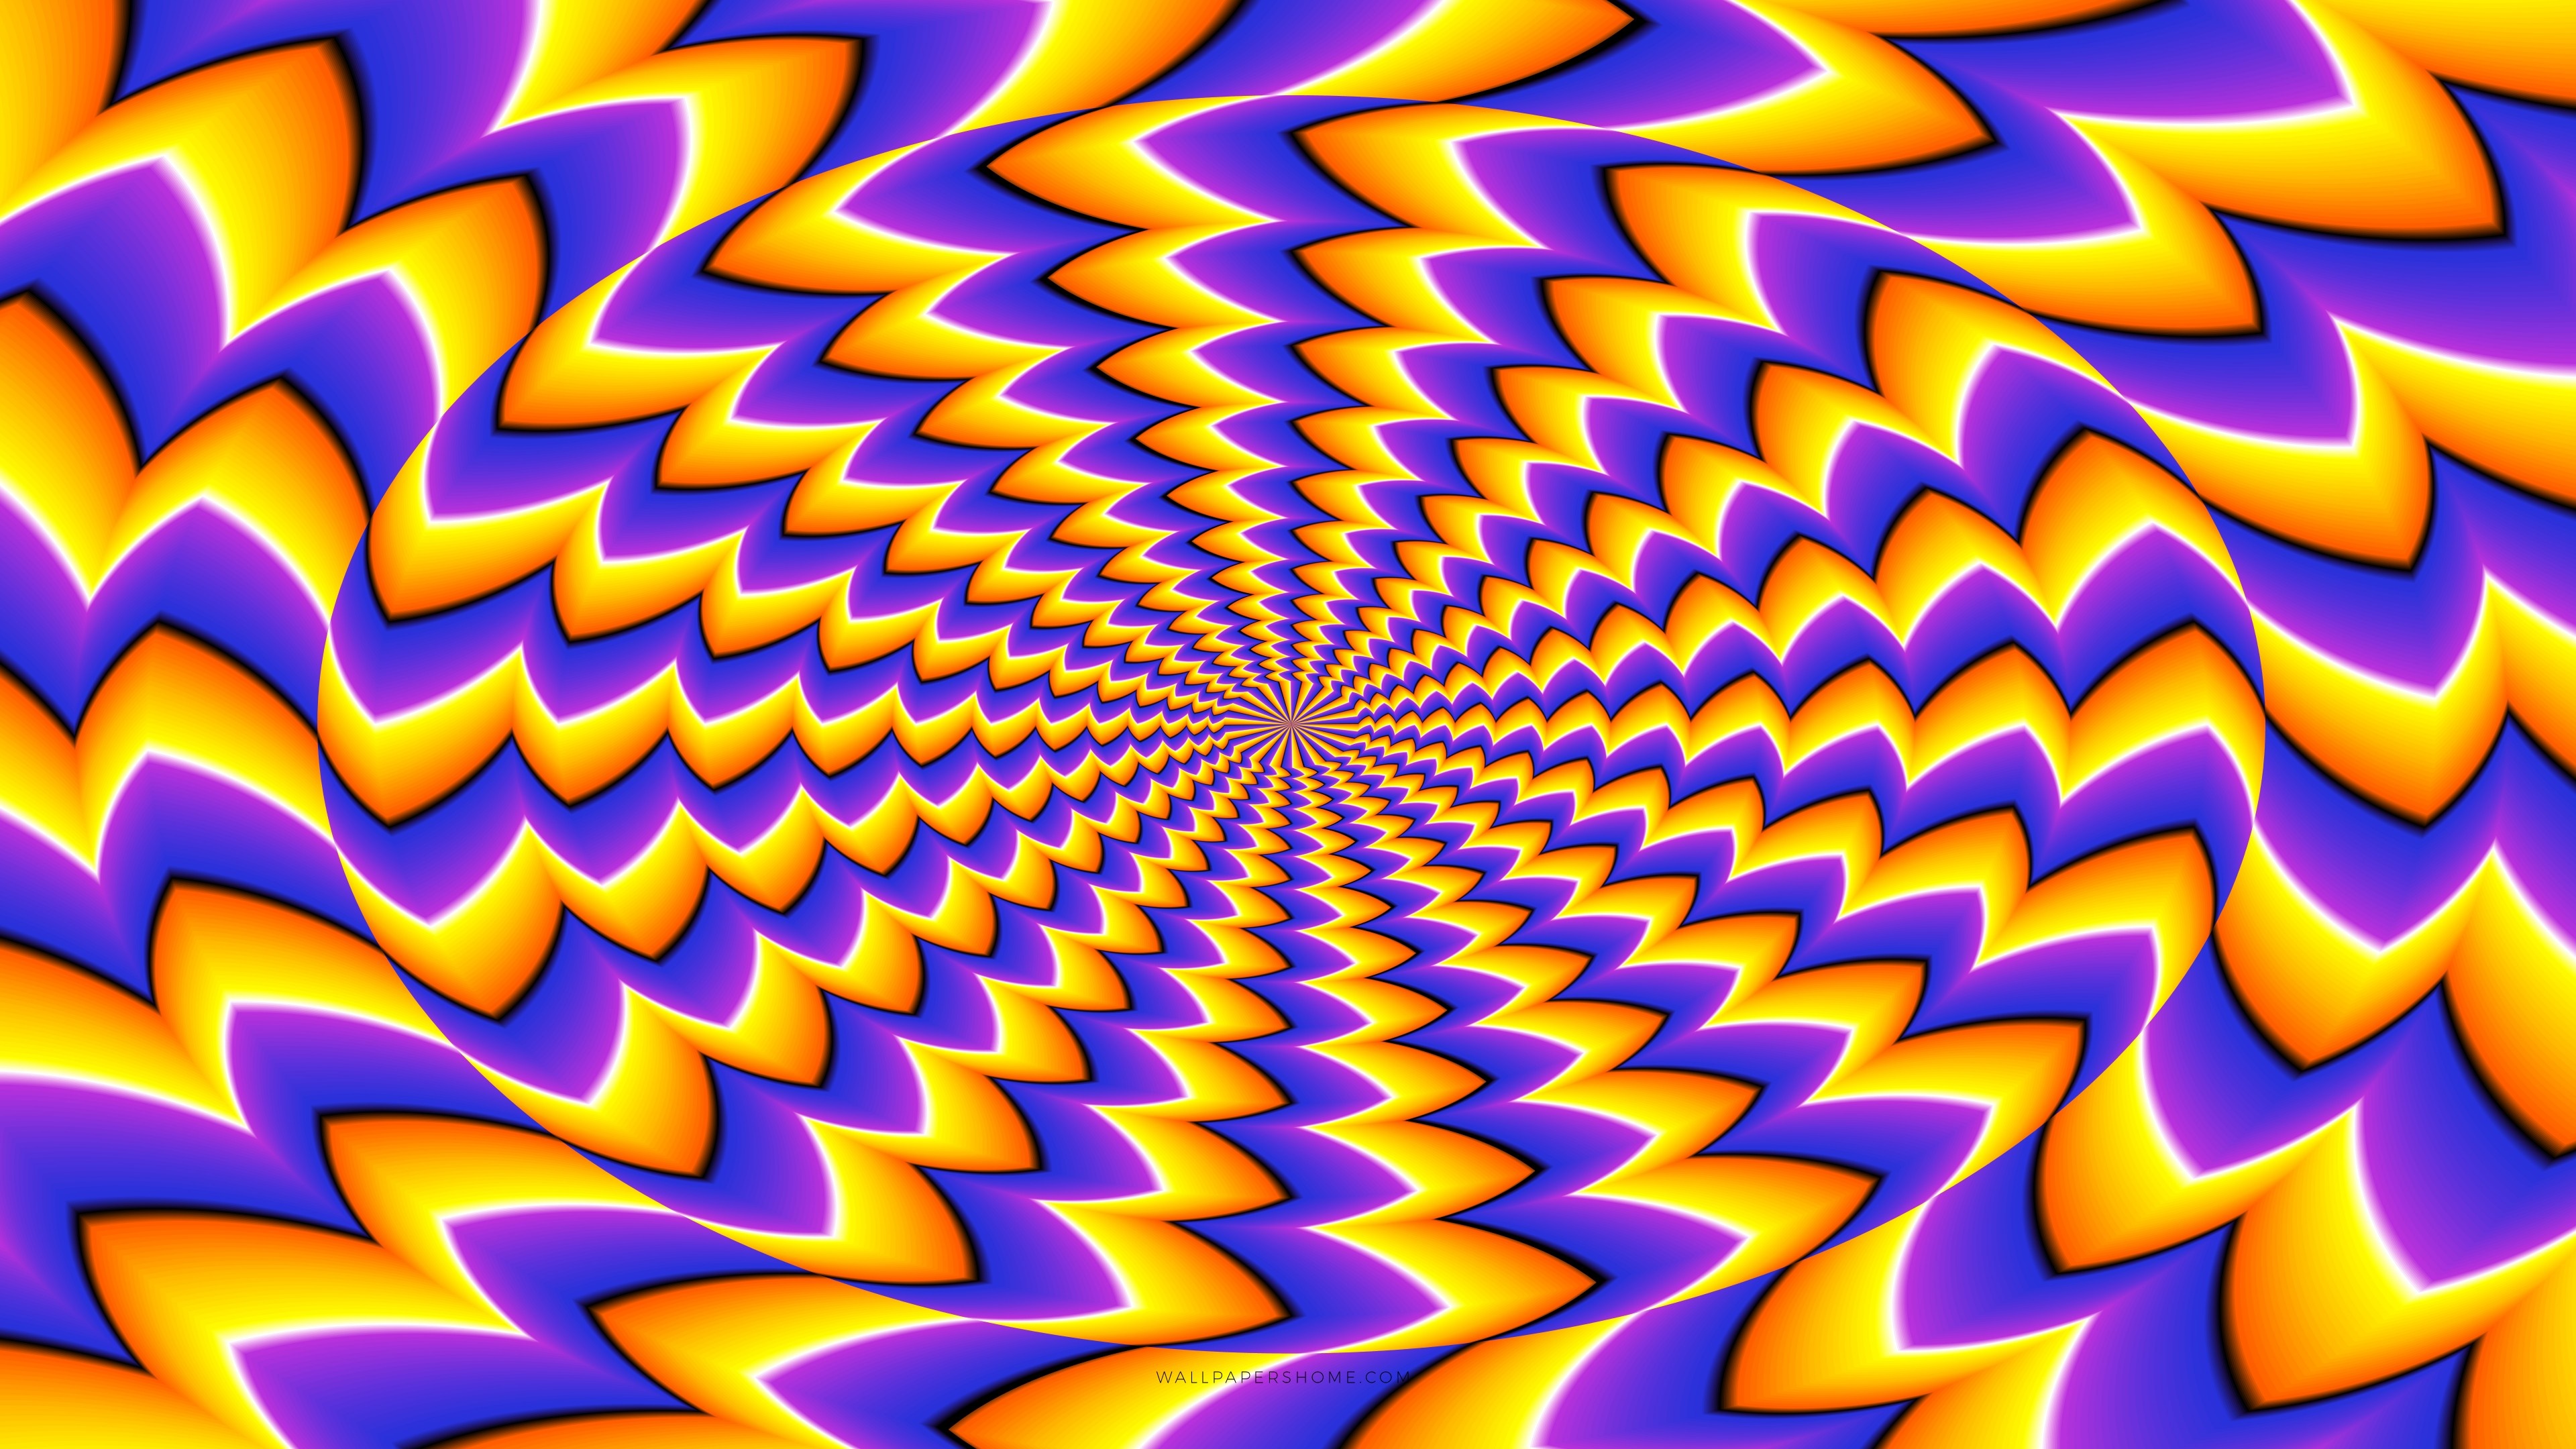 Optical illusion wallpaper, 8k abstract, Crystal clear picture, 3840x2160 4K Desktop